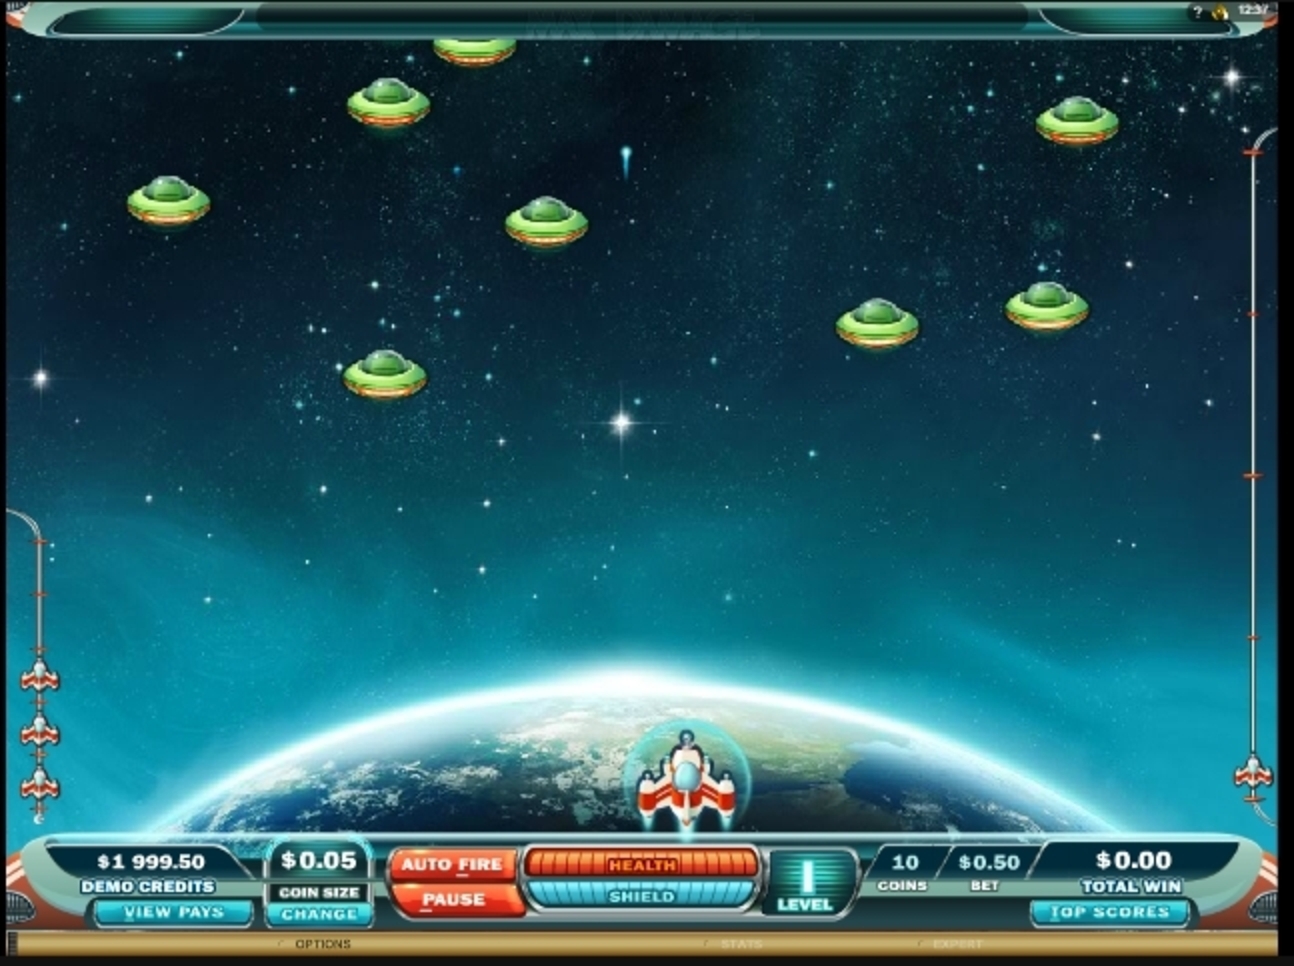 Reels in Max Damage and the Alien Attack Slot Game by Microgaming